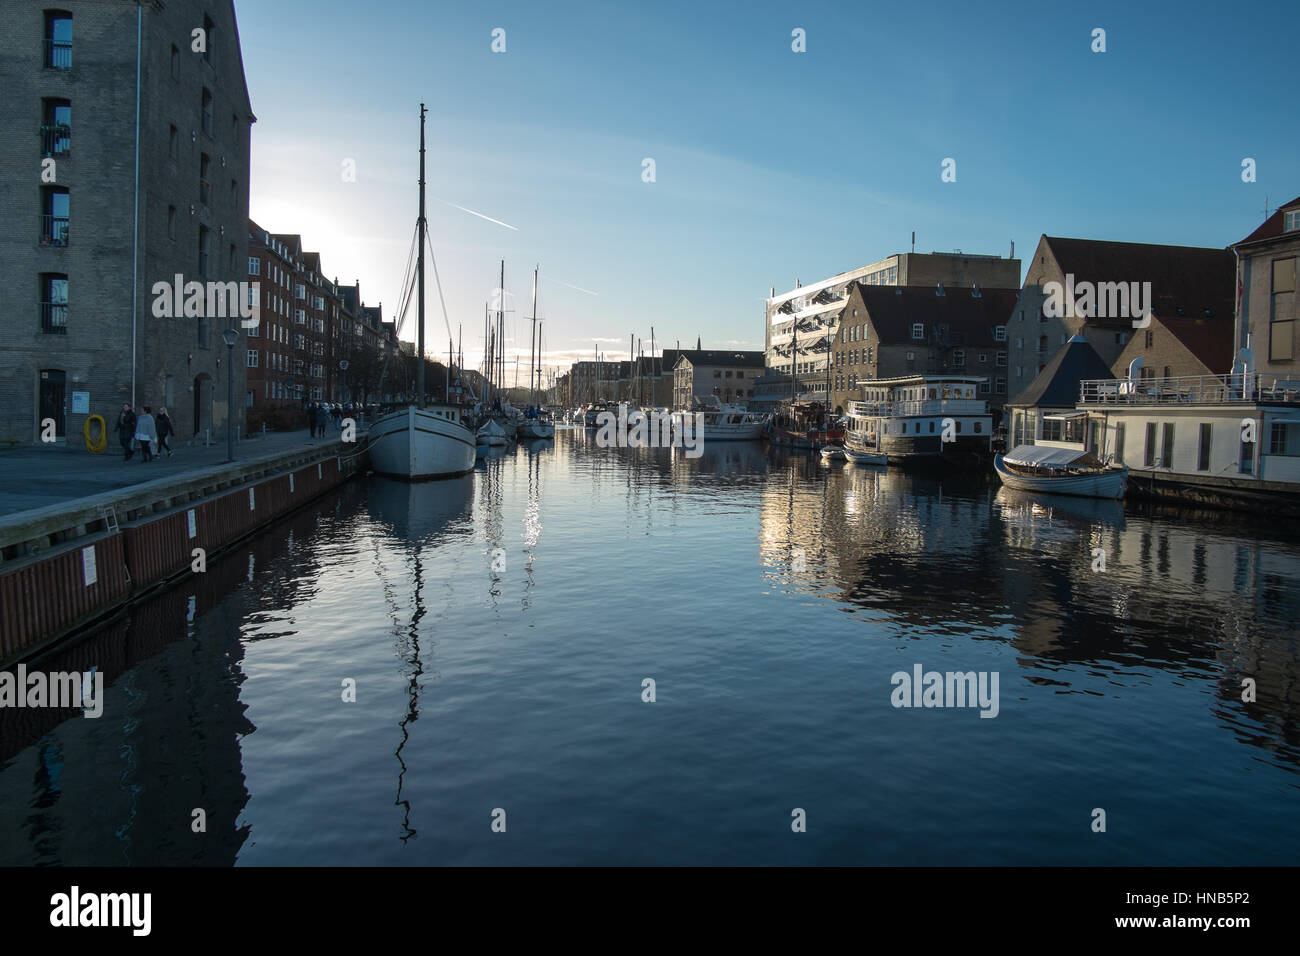 Christianshavn canal in the late afternoon Stock Photo